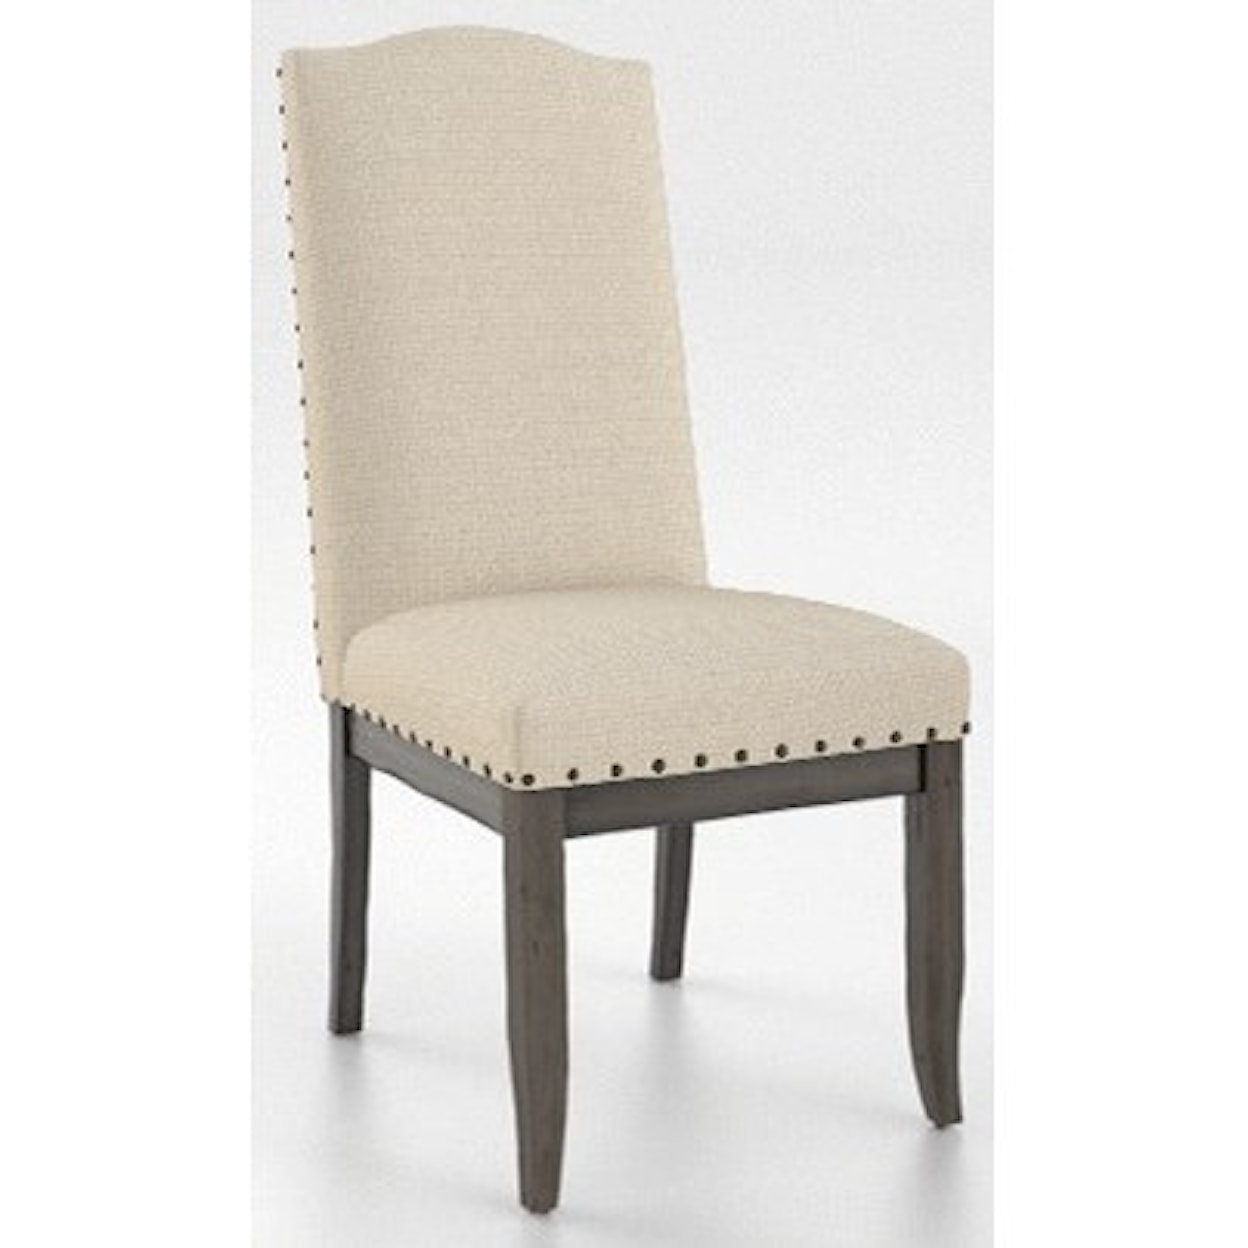 Canadel Champlain Customizable Side Chair with Nailhead Trim